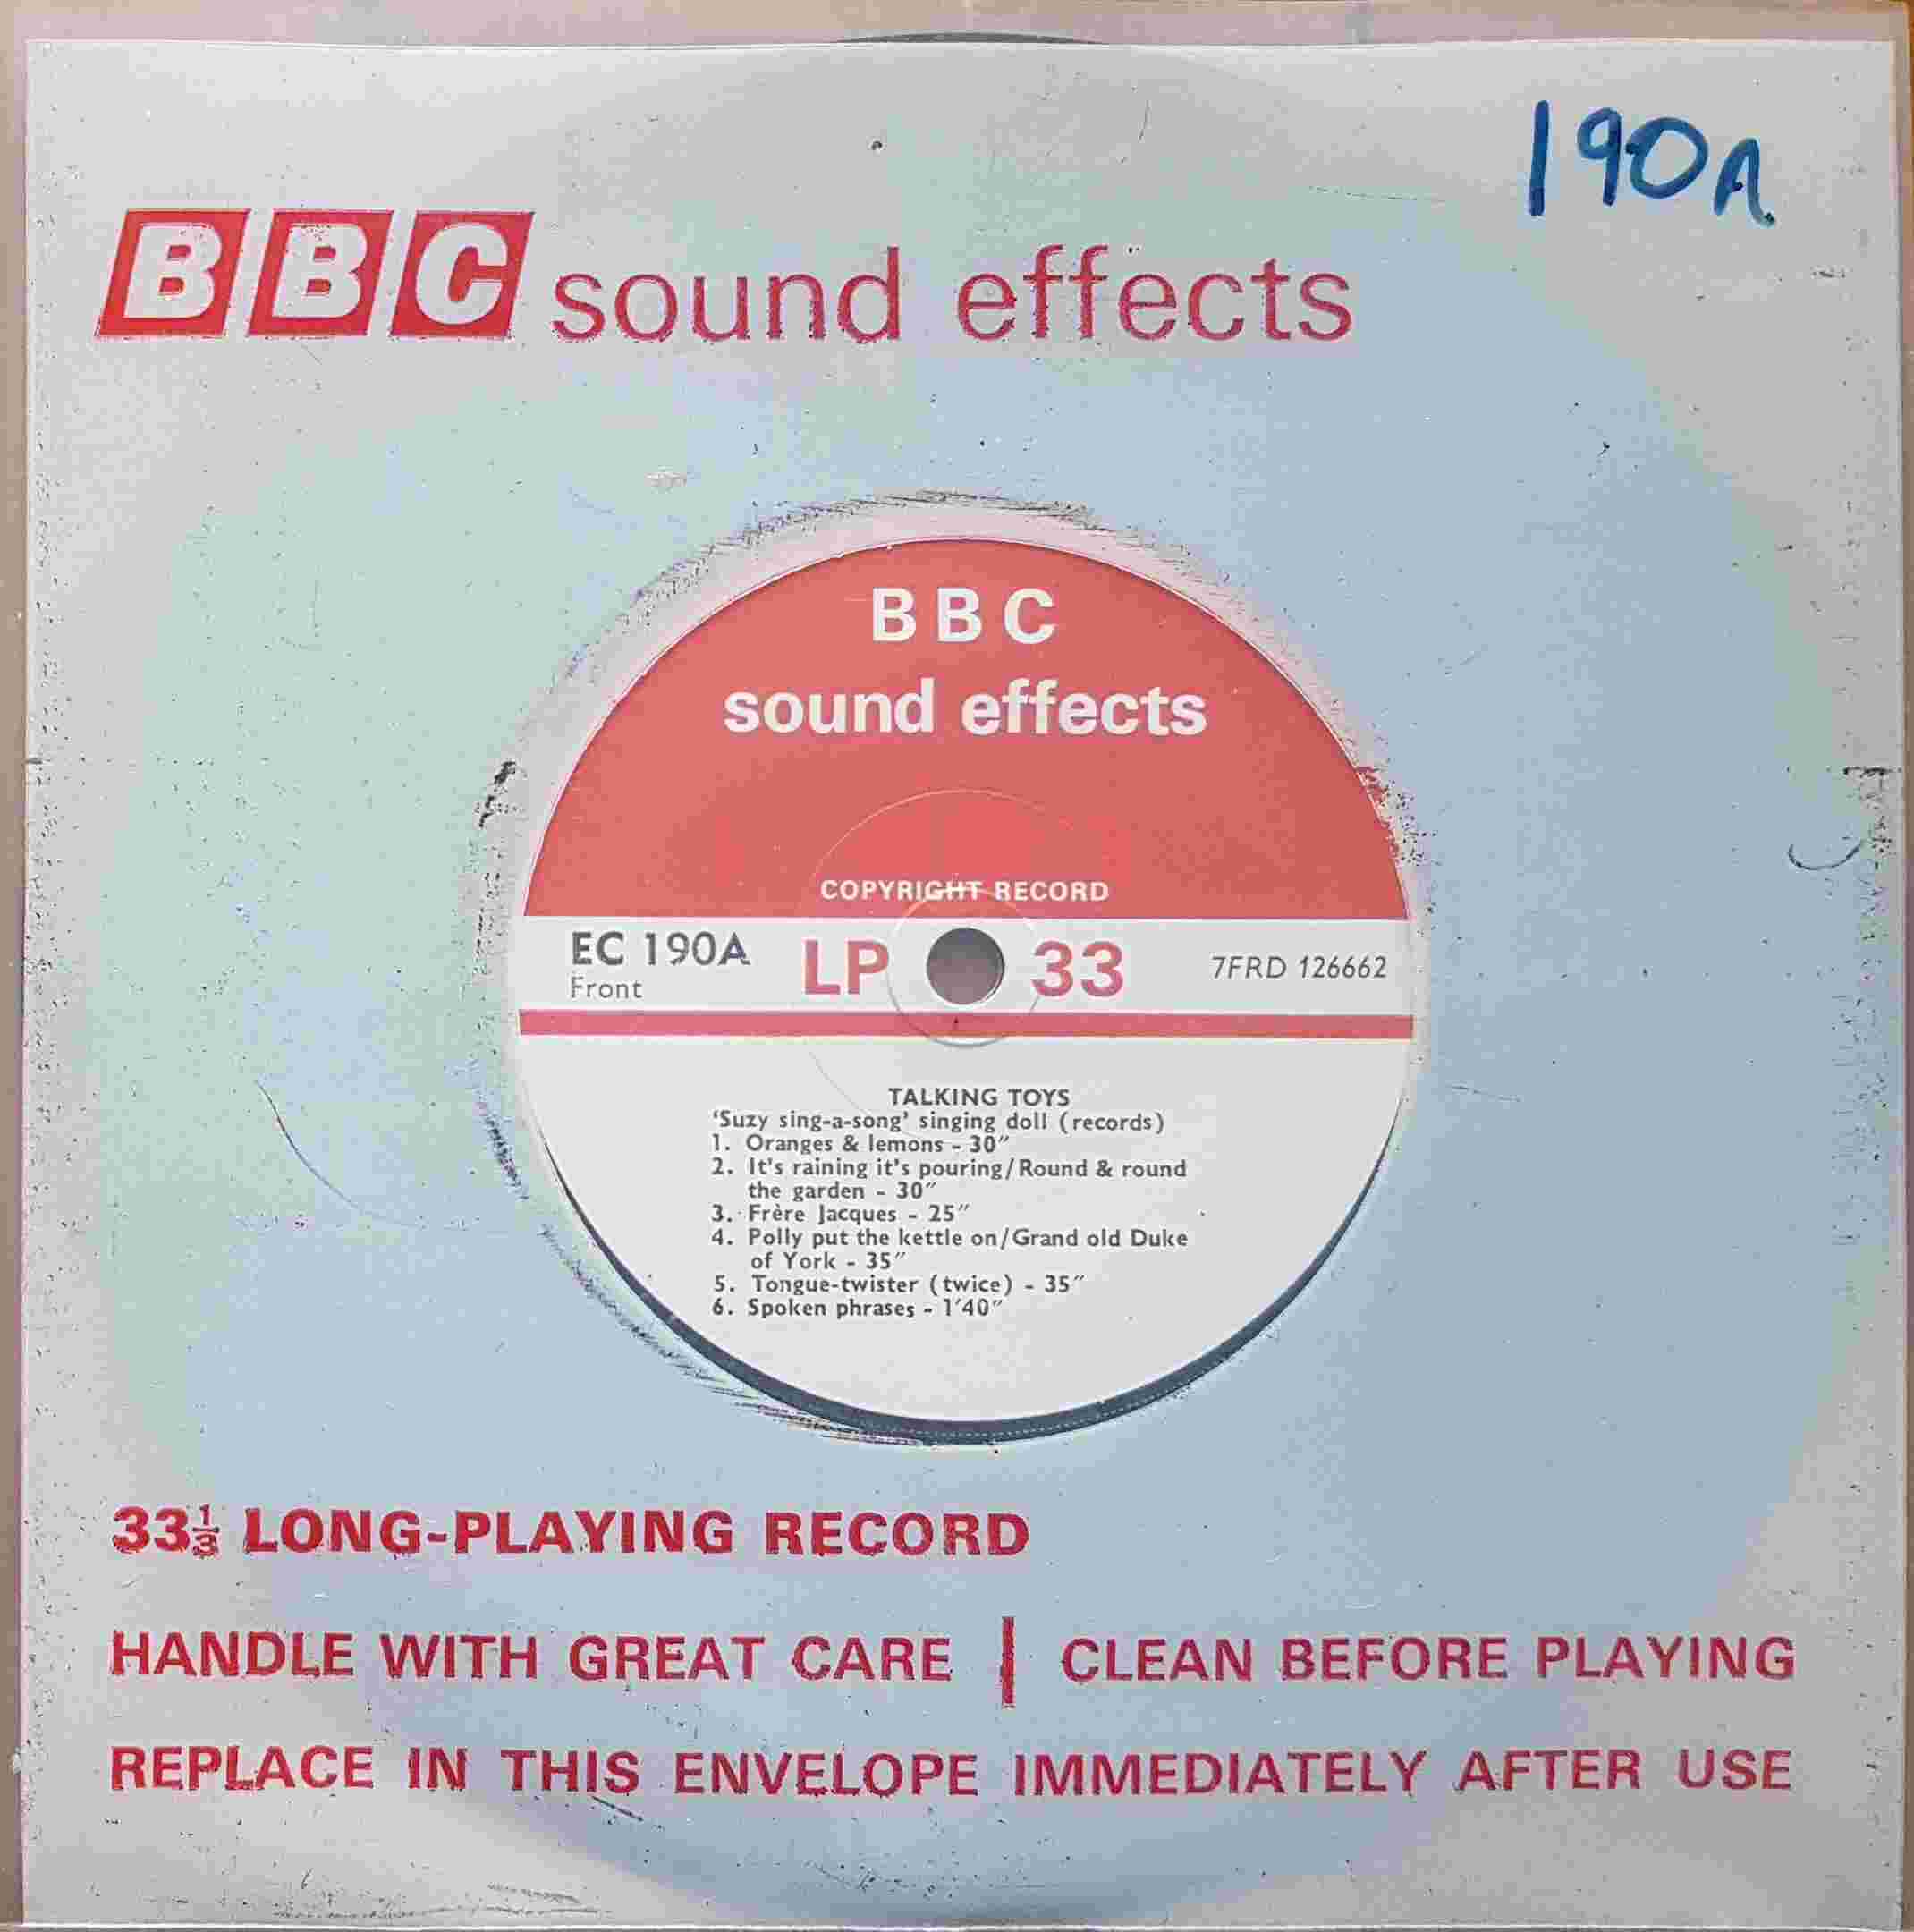 Picture of EC 190A Talking toys by artist Not registered from the BBC records and Tapes library